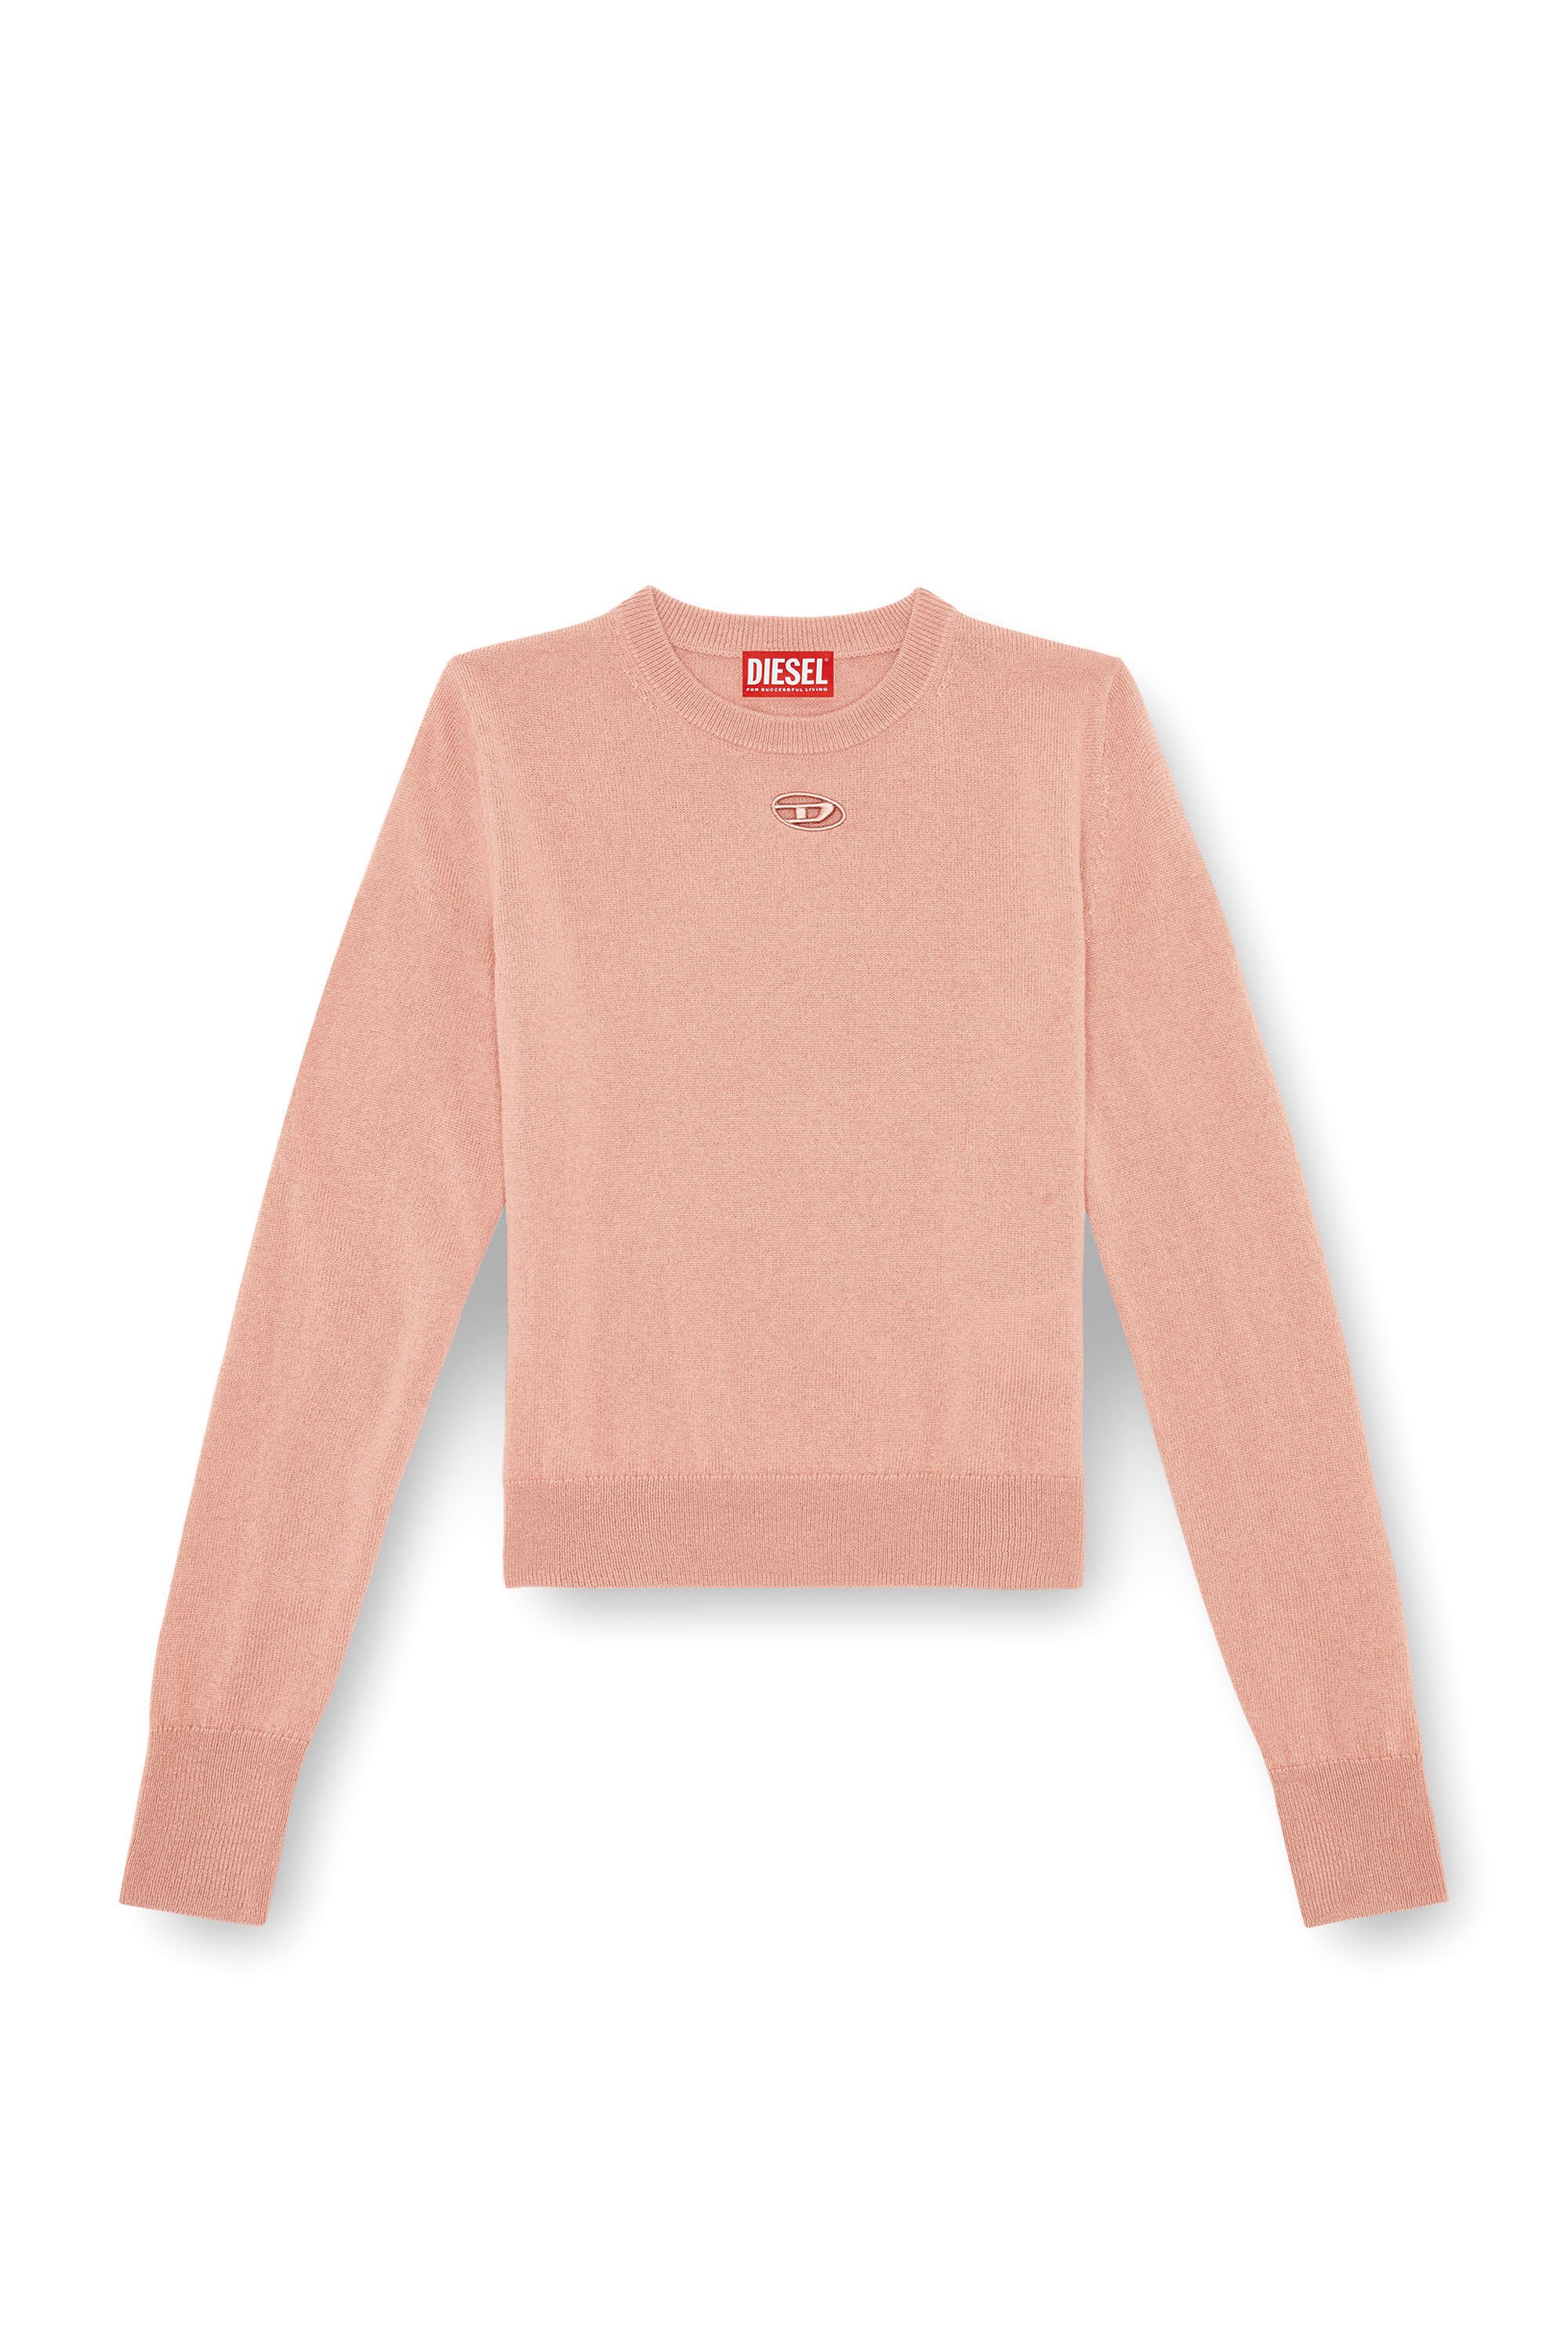 Diesel - M-AREESAX, Woman Wool and cashmere top in Pink - Image 2